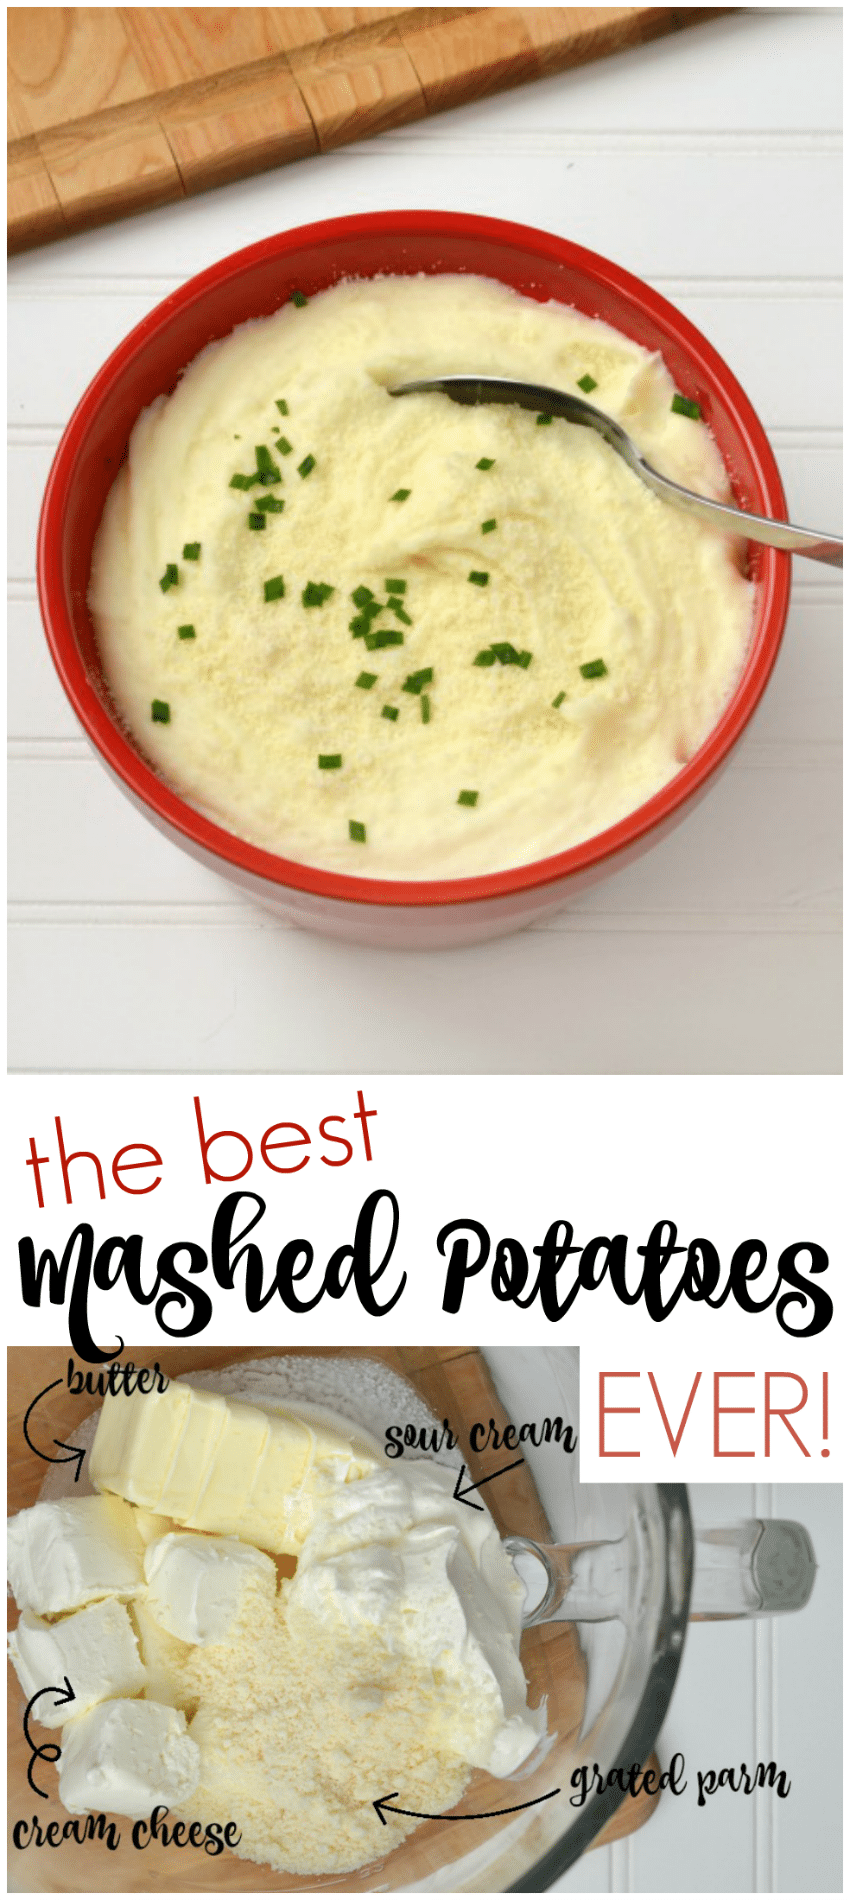 Mashed potatoes recipe with lots of creamy goodness! These are ALWAYS a crowd pleaser!